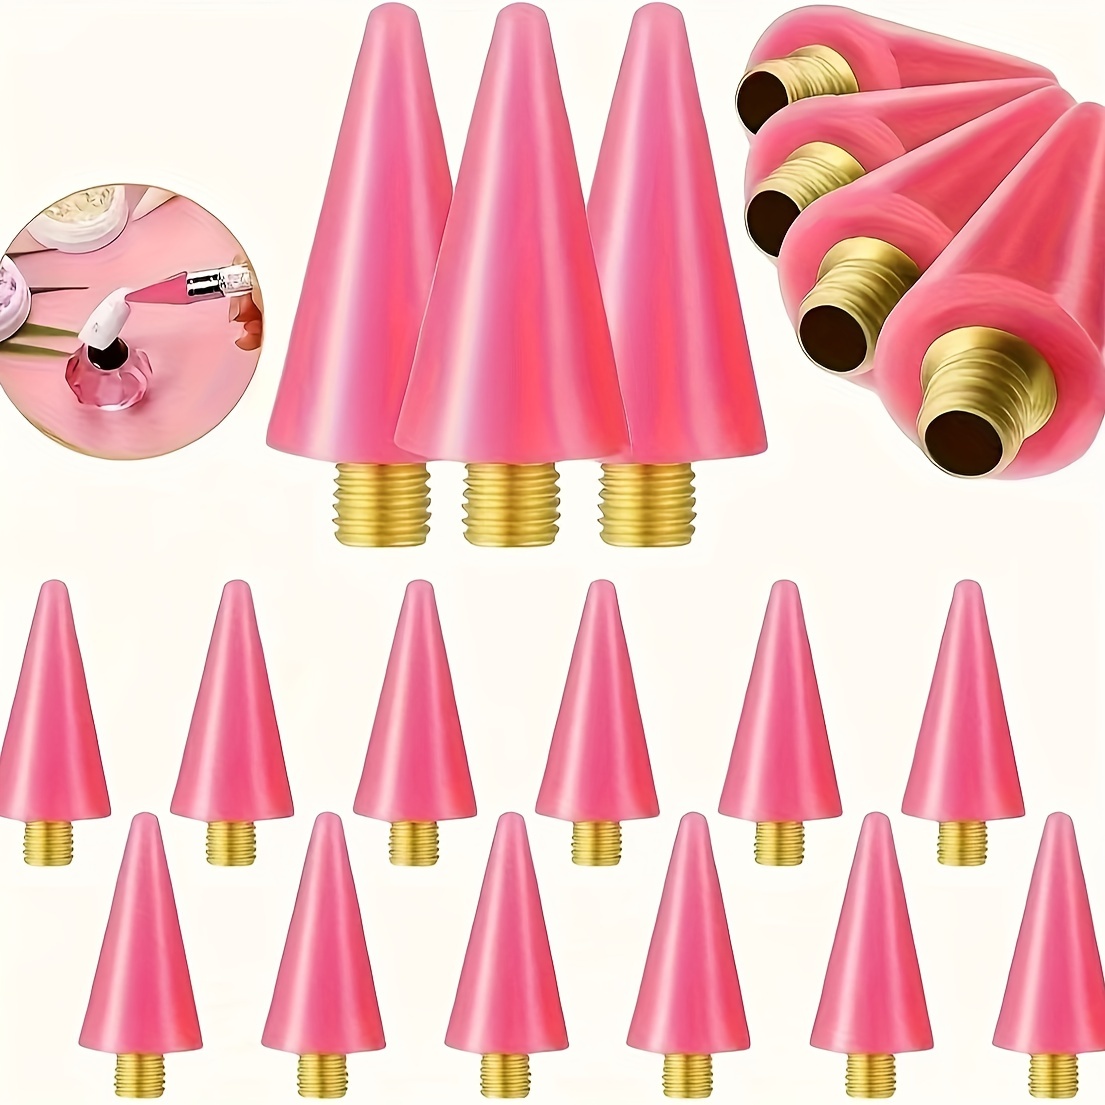 

12pcs Replacement Wax Pen Tip Head, For Nail Rhinestones Picker, Replacement Wax Accessories